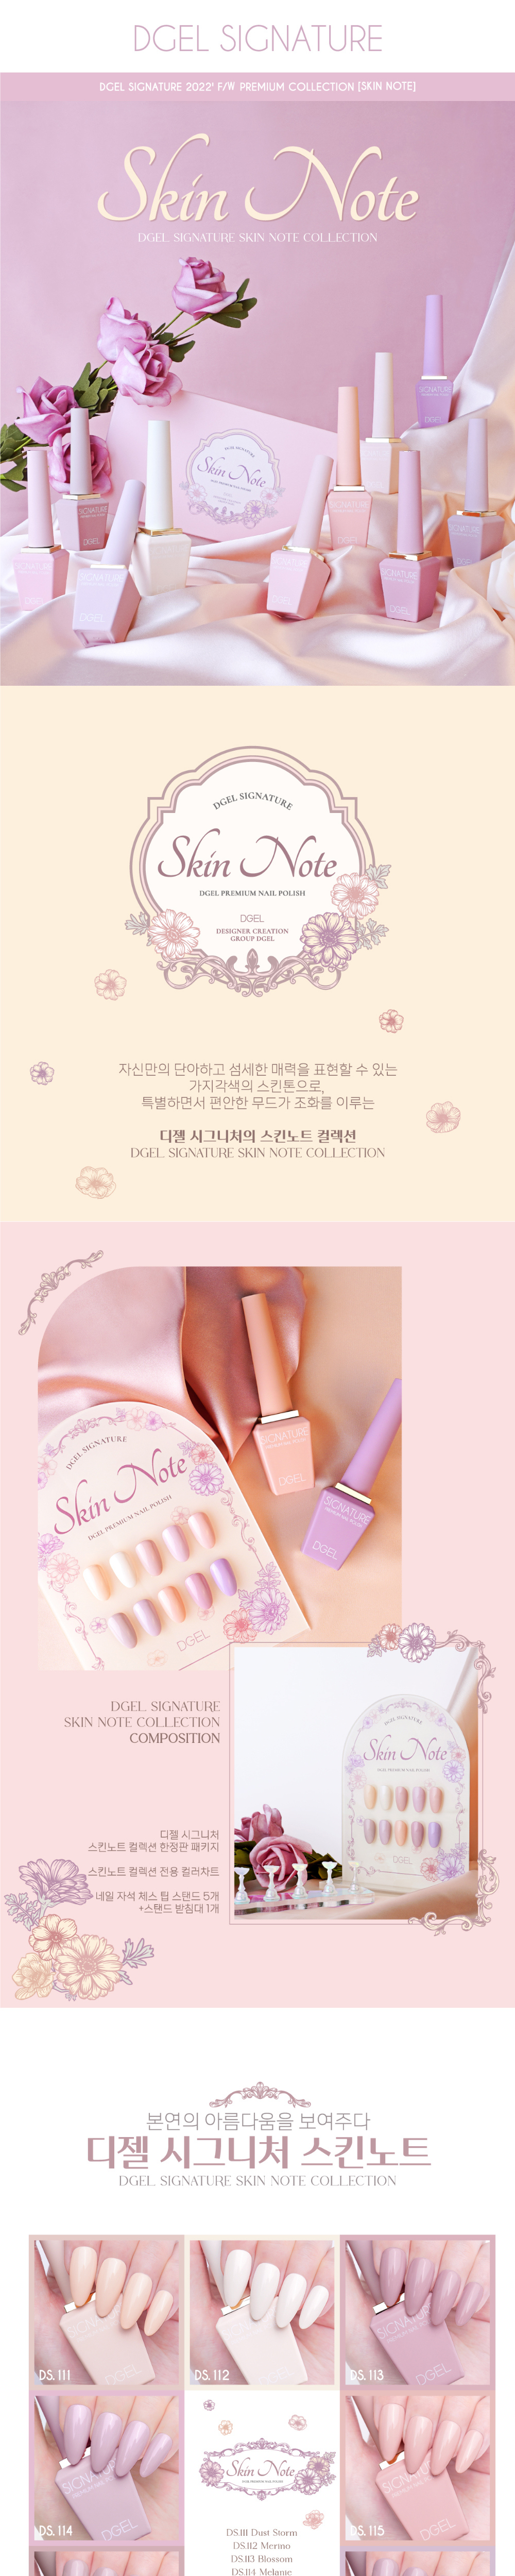 accessories baby pink color image-S1L2